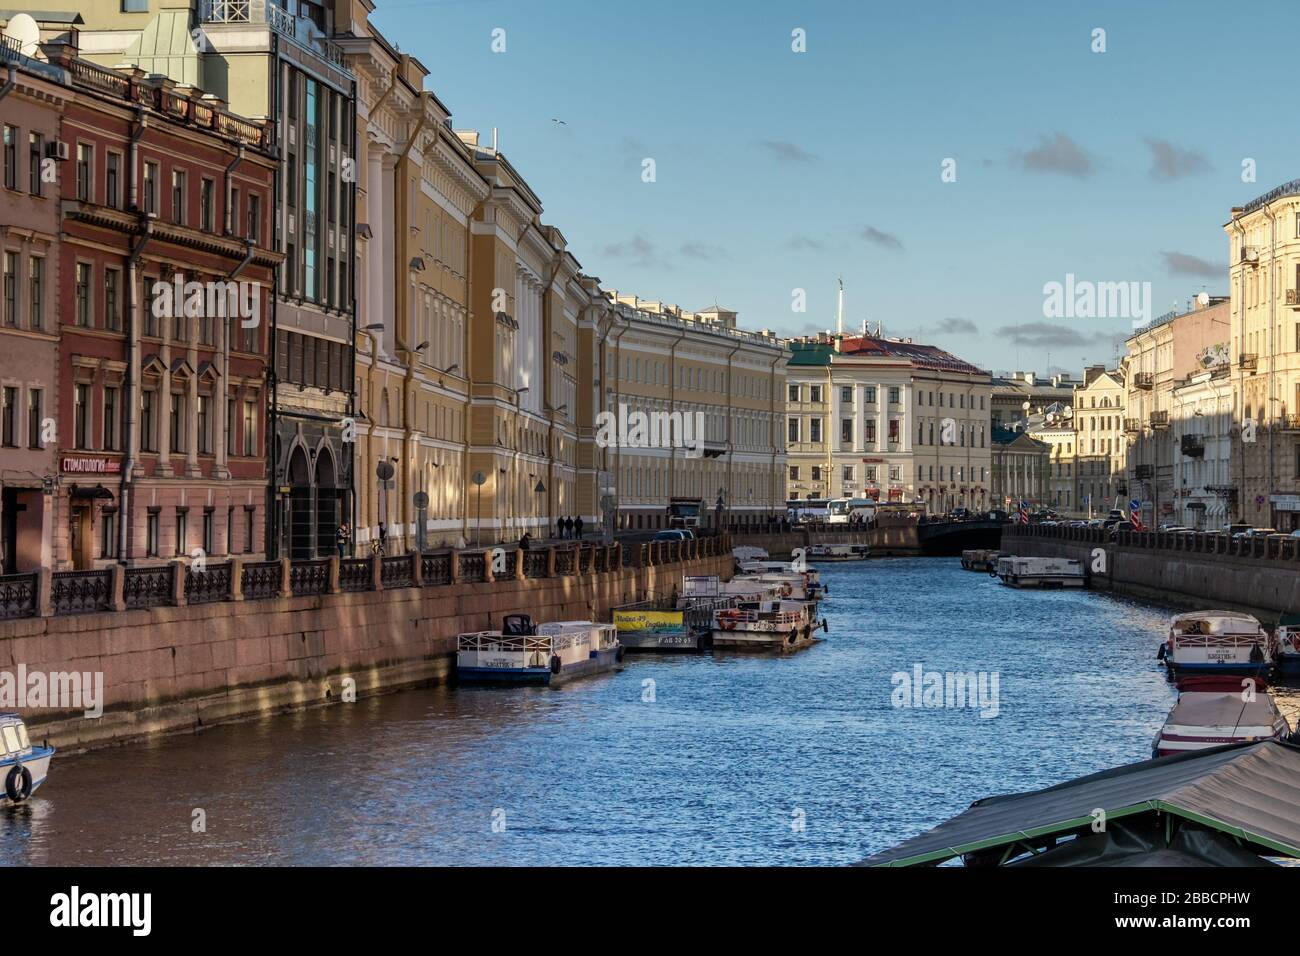 Boats on the Moyka river and buildings on the embankment, St Petersburg, Russia Stock Photo